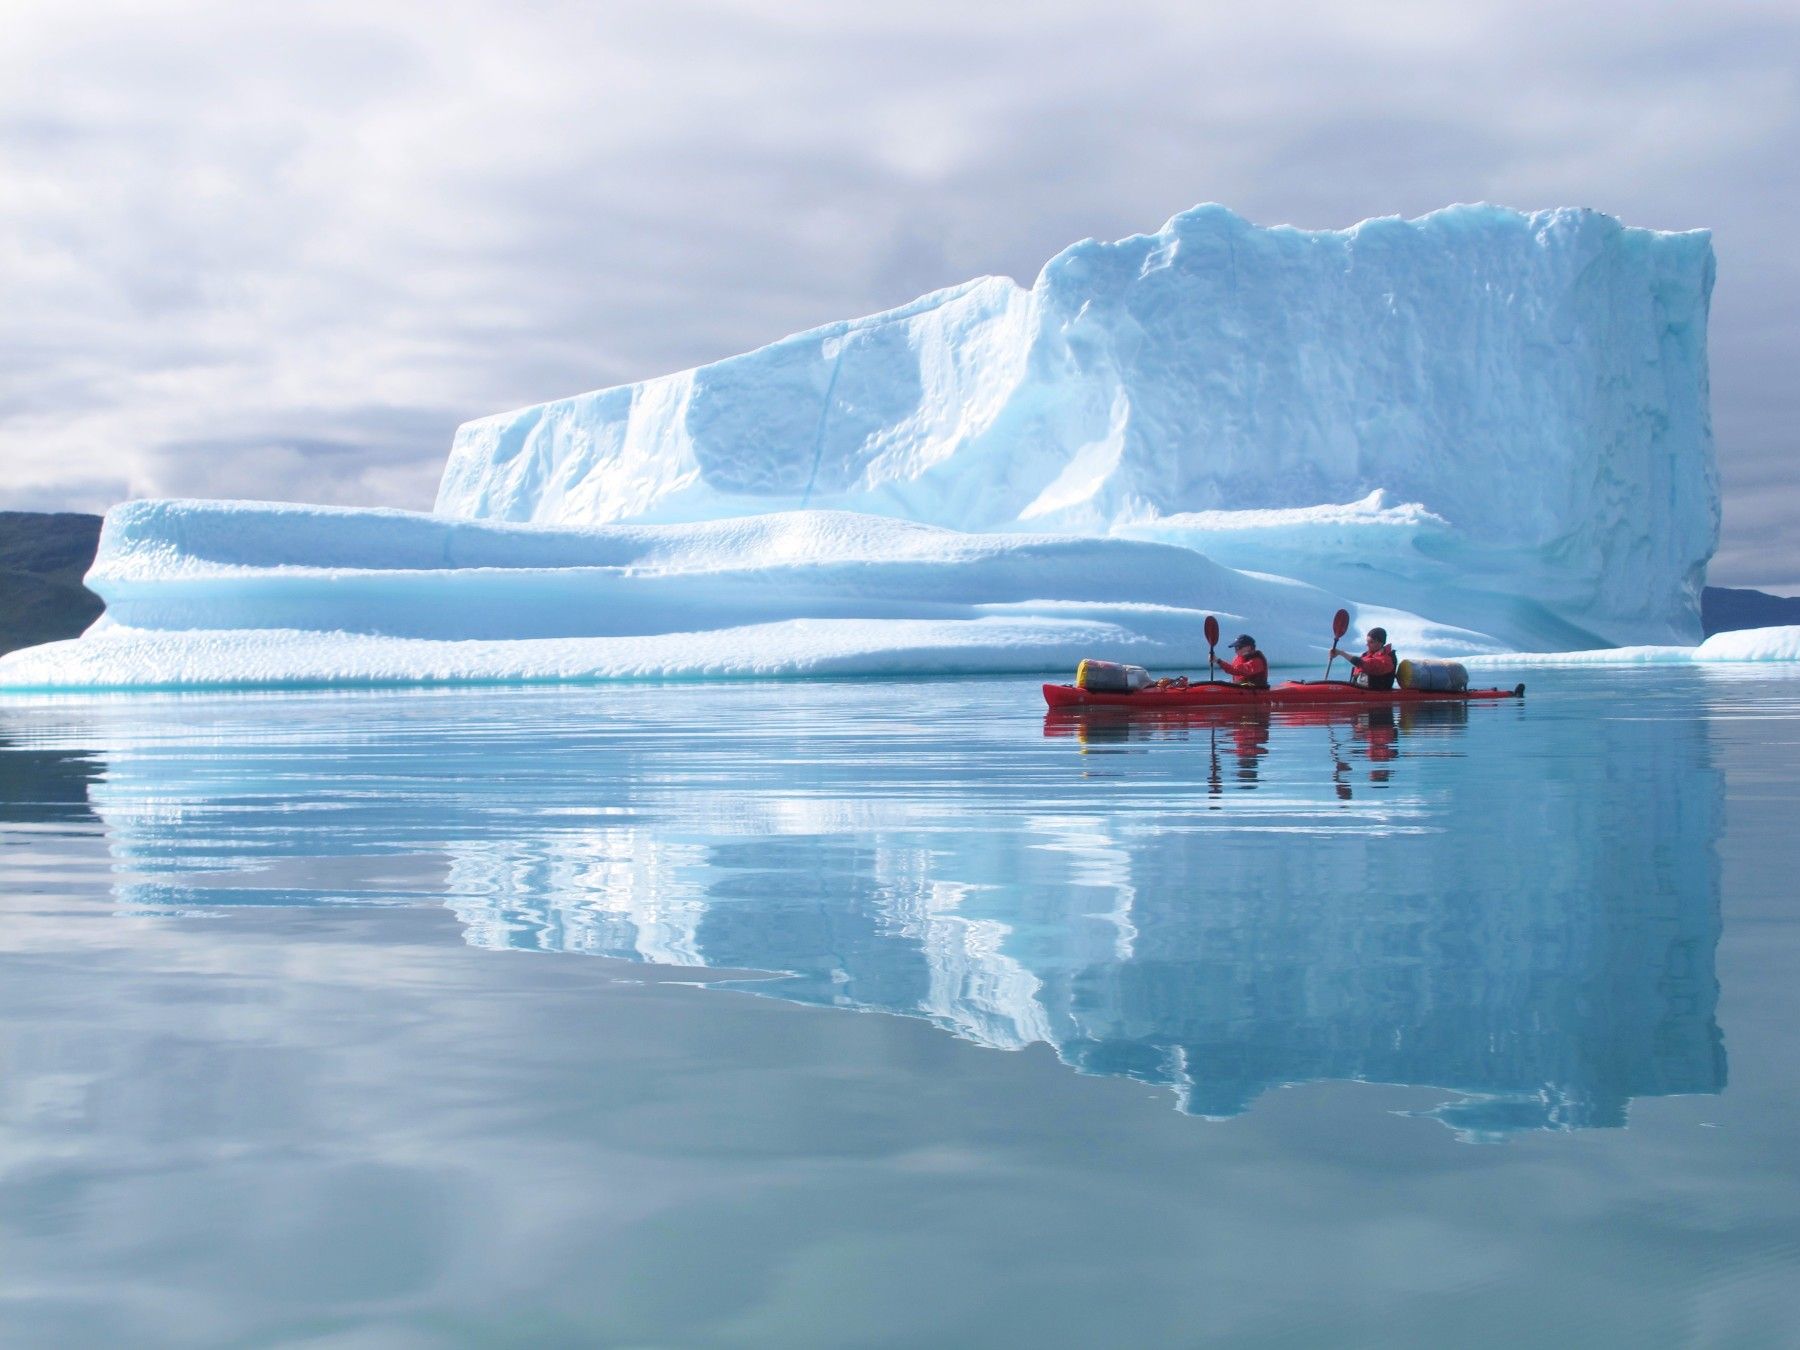 Two paddlers in a double kayak, paddling past a large iceberg in Greenland.